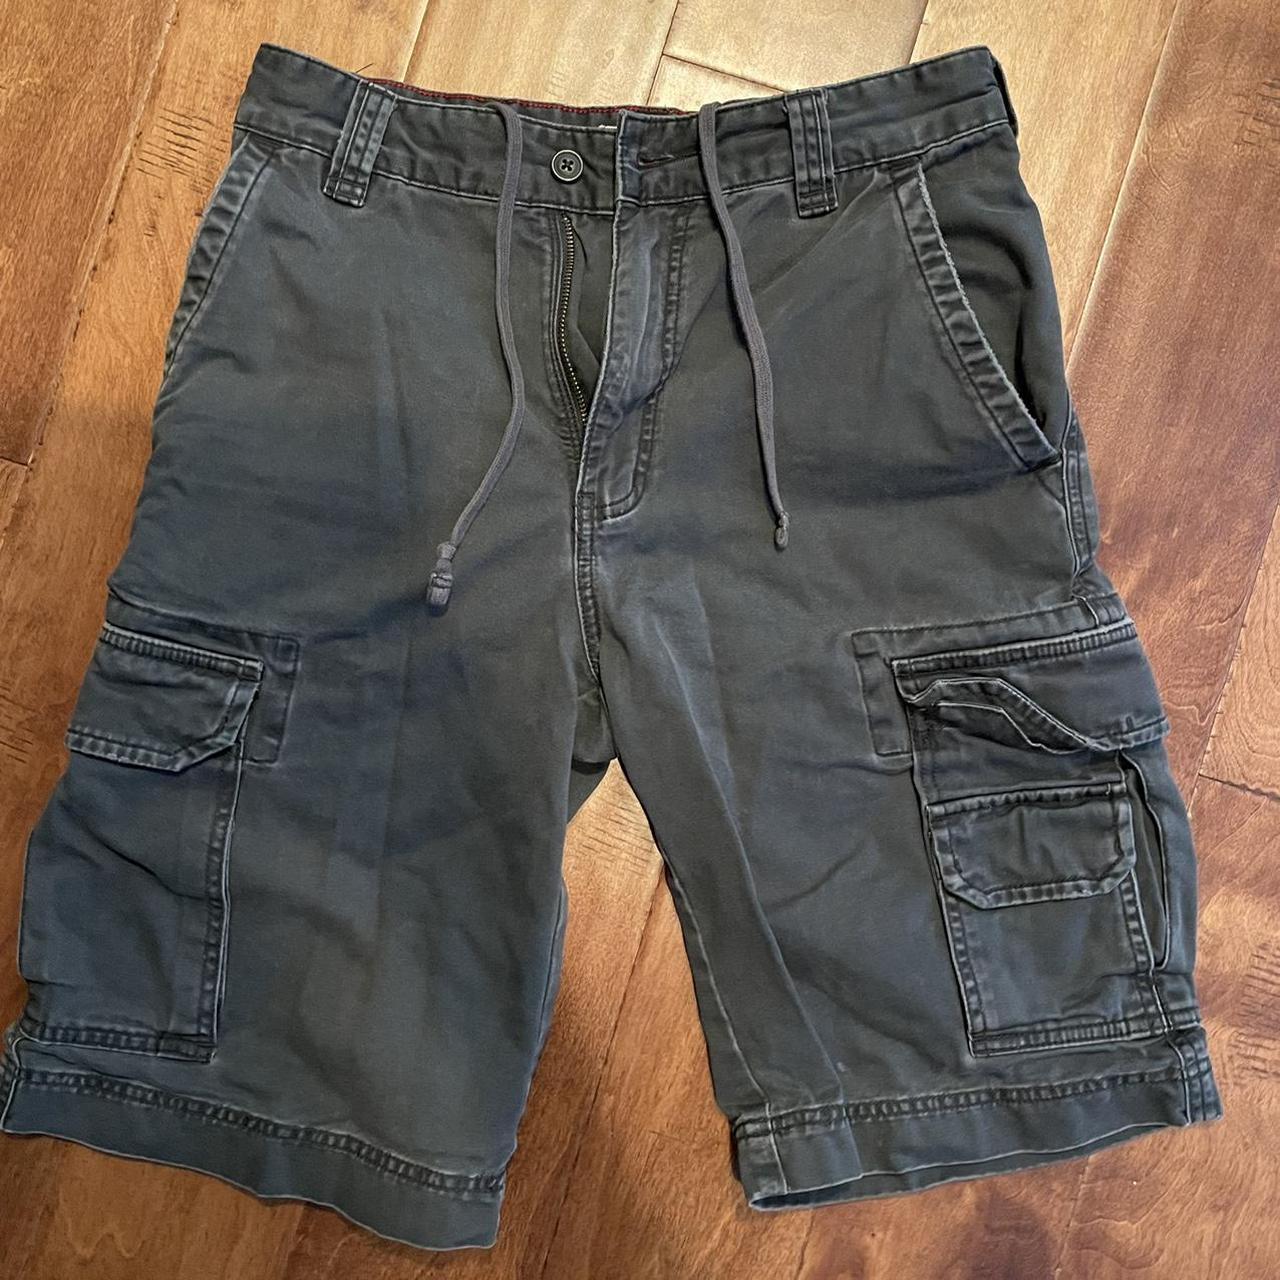 Mossimo Men's Grey and Silver Shorts